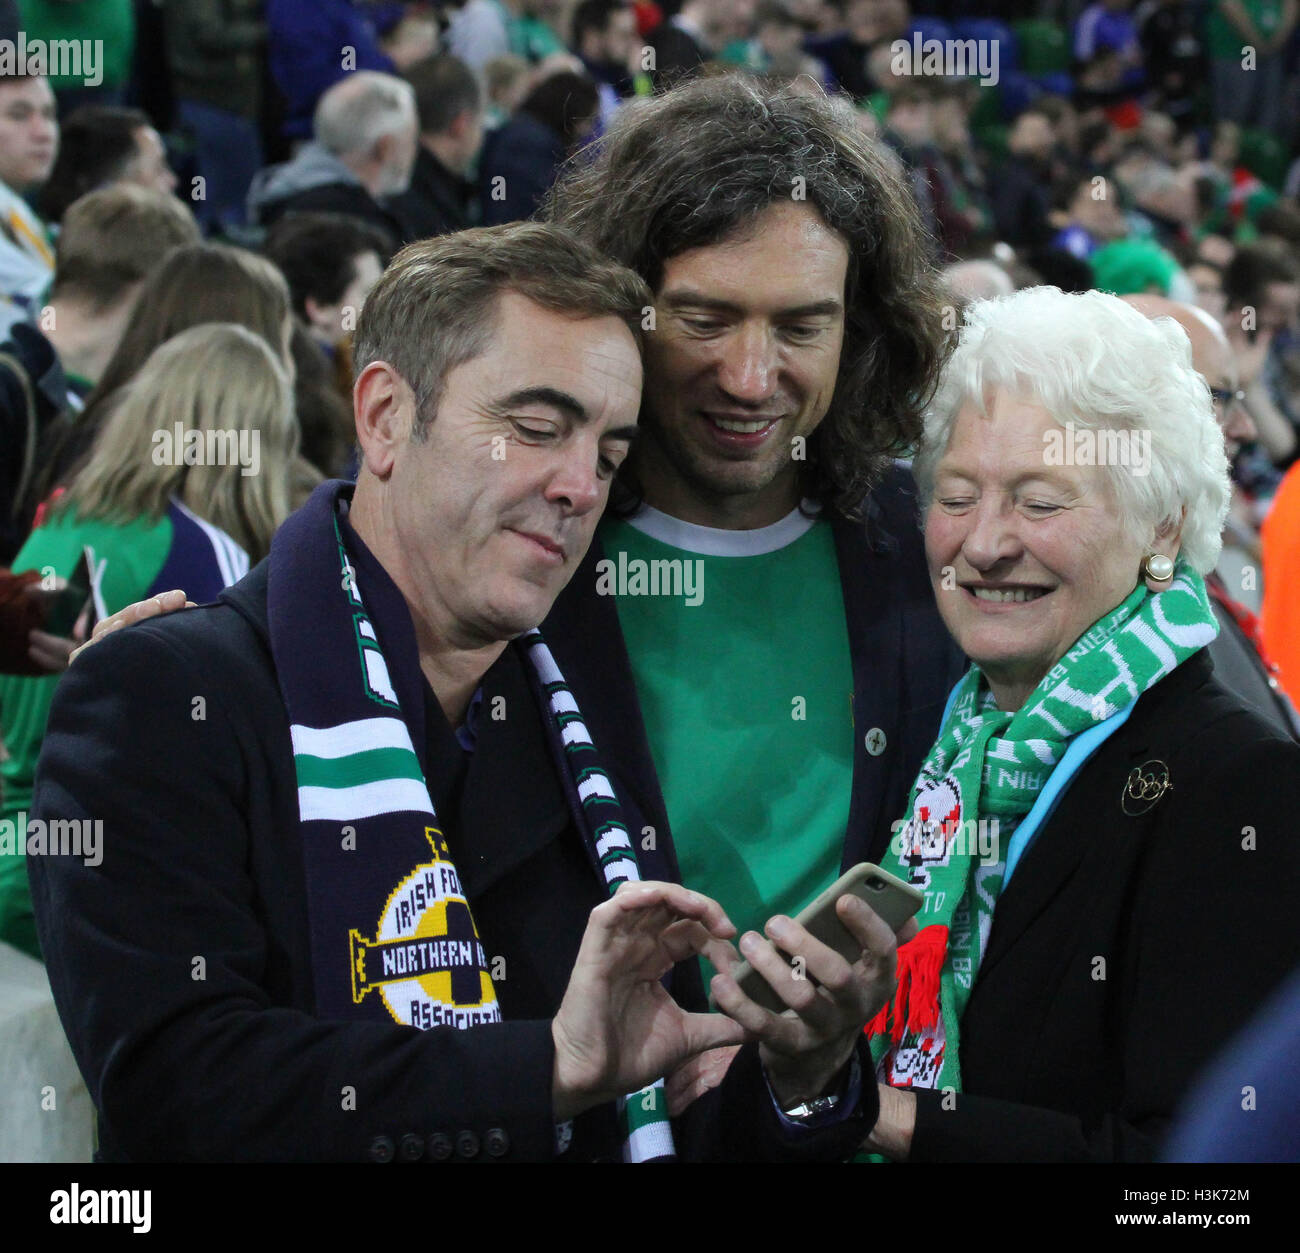 National Football Stadium at Windsor Park, Belfast, Northern Ireland.  08th October 2016. To mark the official opening of the National Football Stadium at Windsor Park in Belfast (the re-development of the old Windsor Park) a Lap of Northern Ireland Legends around the stadium took place. (L-r) Actor Jimmy Nesbitt, Snow Patrol's Gary Lightbody and Dame Mary Peters at the event. David Hunter/Alamy Live News. Stock Photo